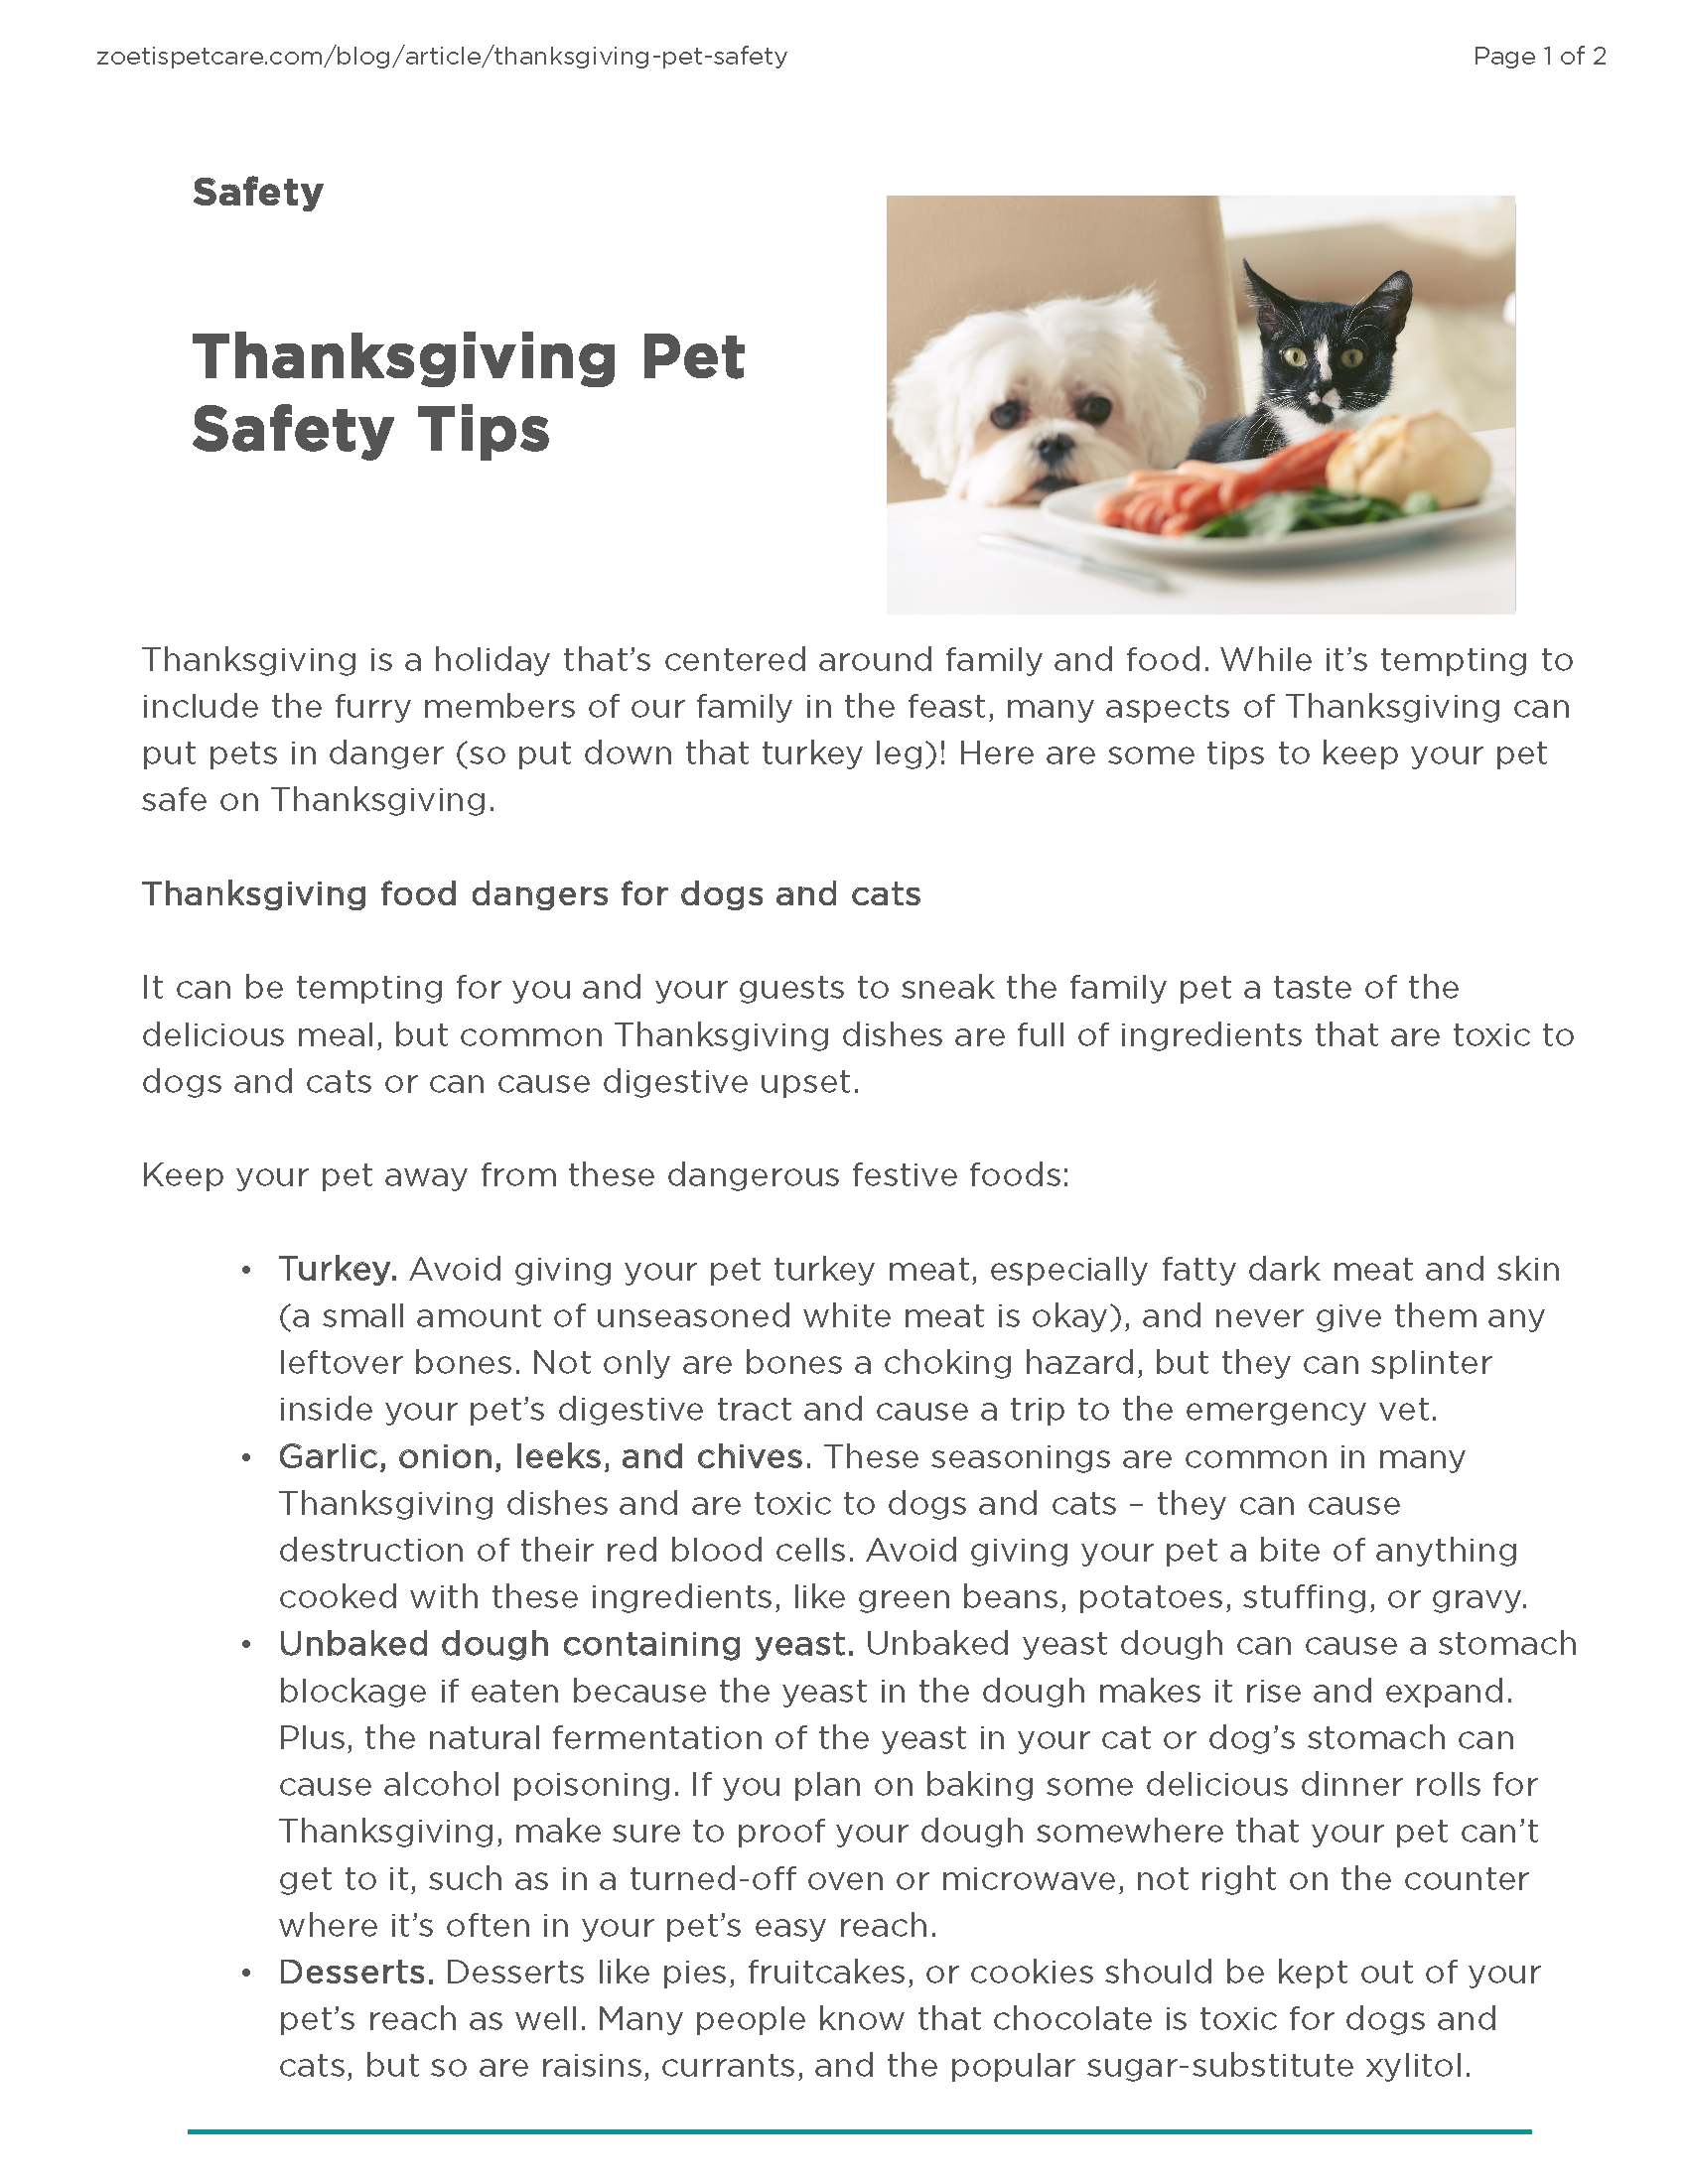 are turkey legs safe for dogs